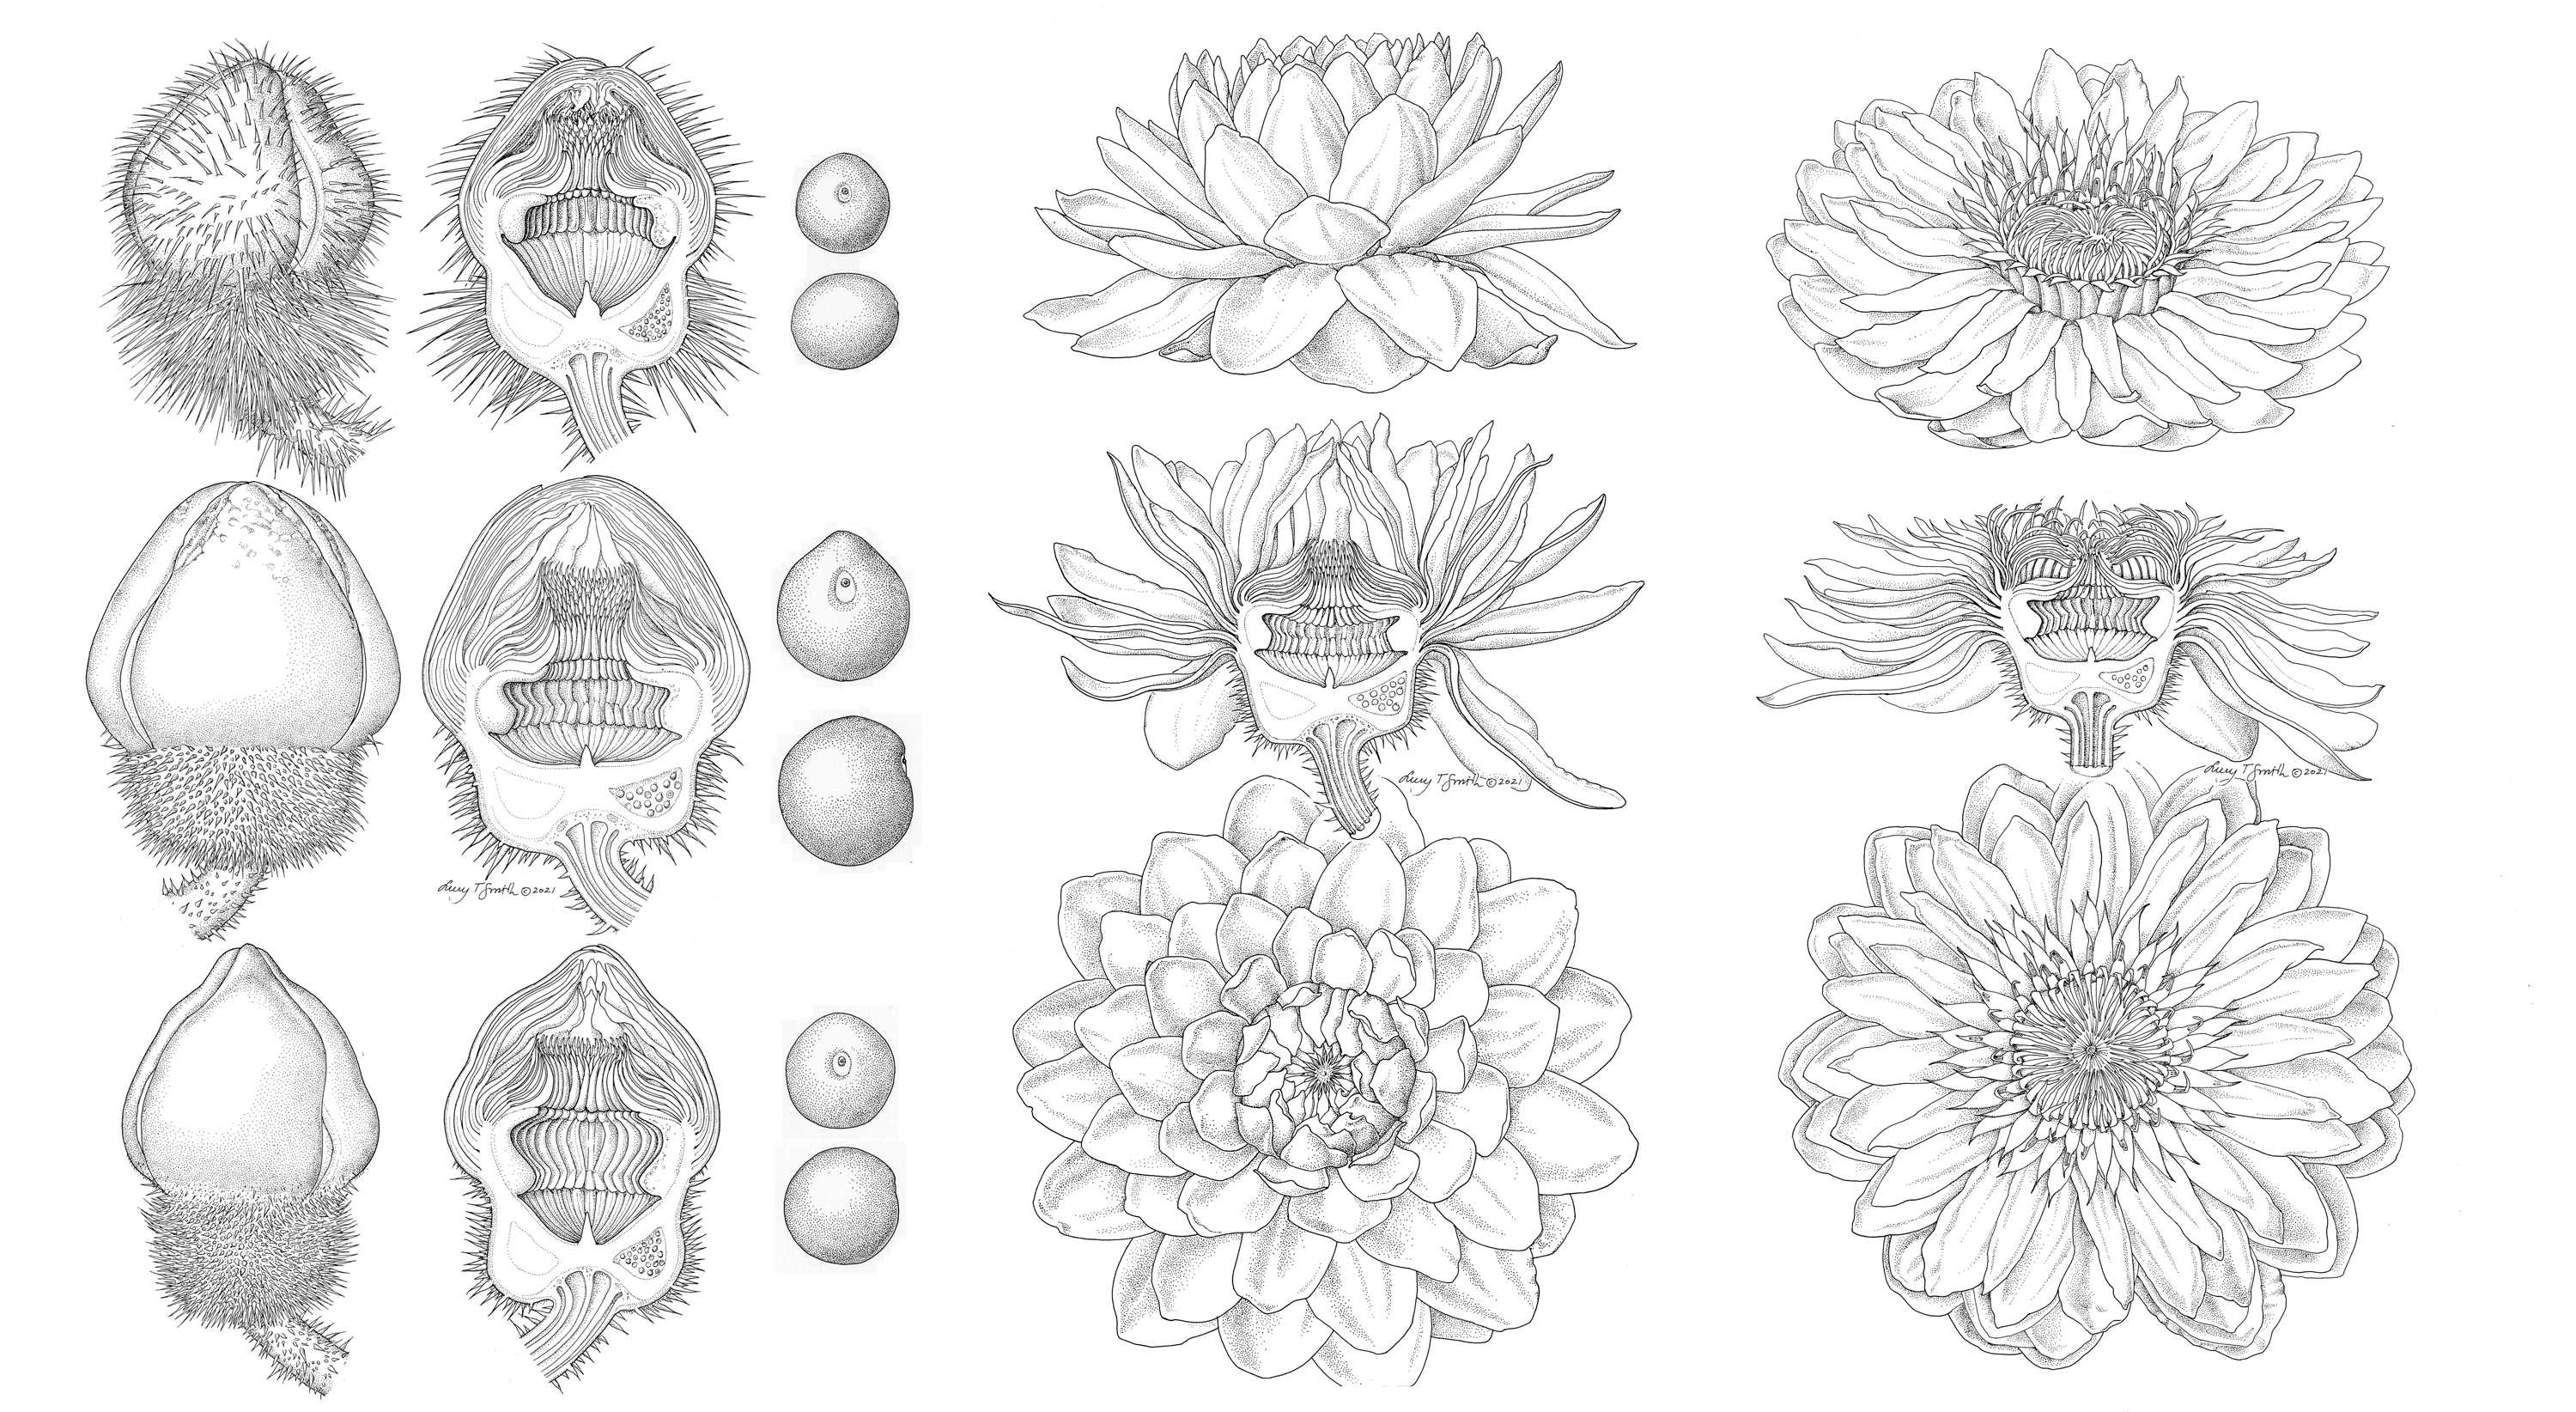 Black and white drawings of buds, flowers and seeds of three species of giant waterlily, showing the differences and comparing cutaway interiors